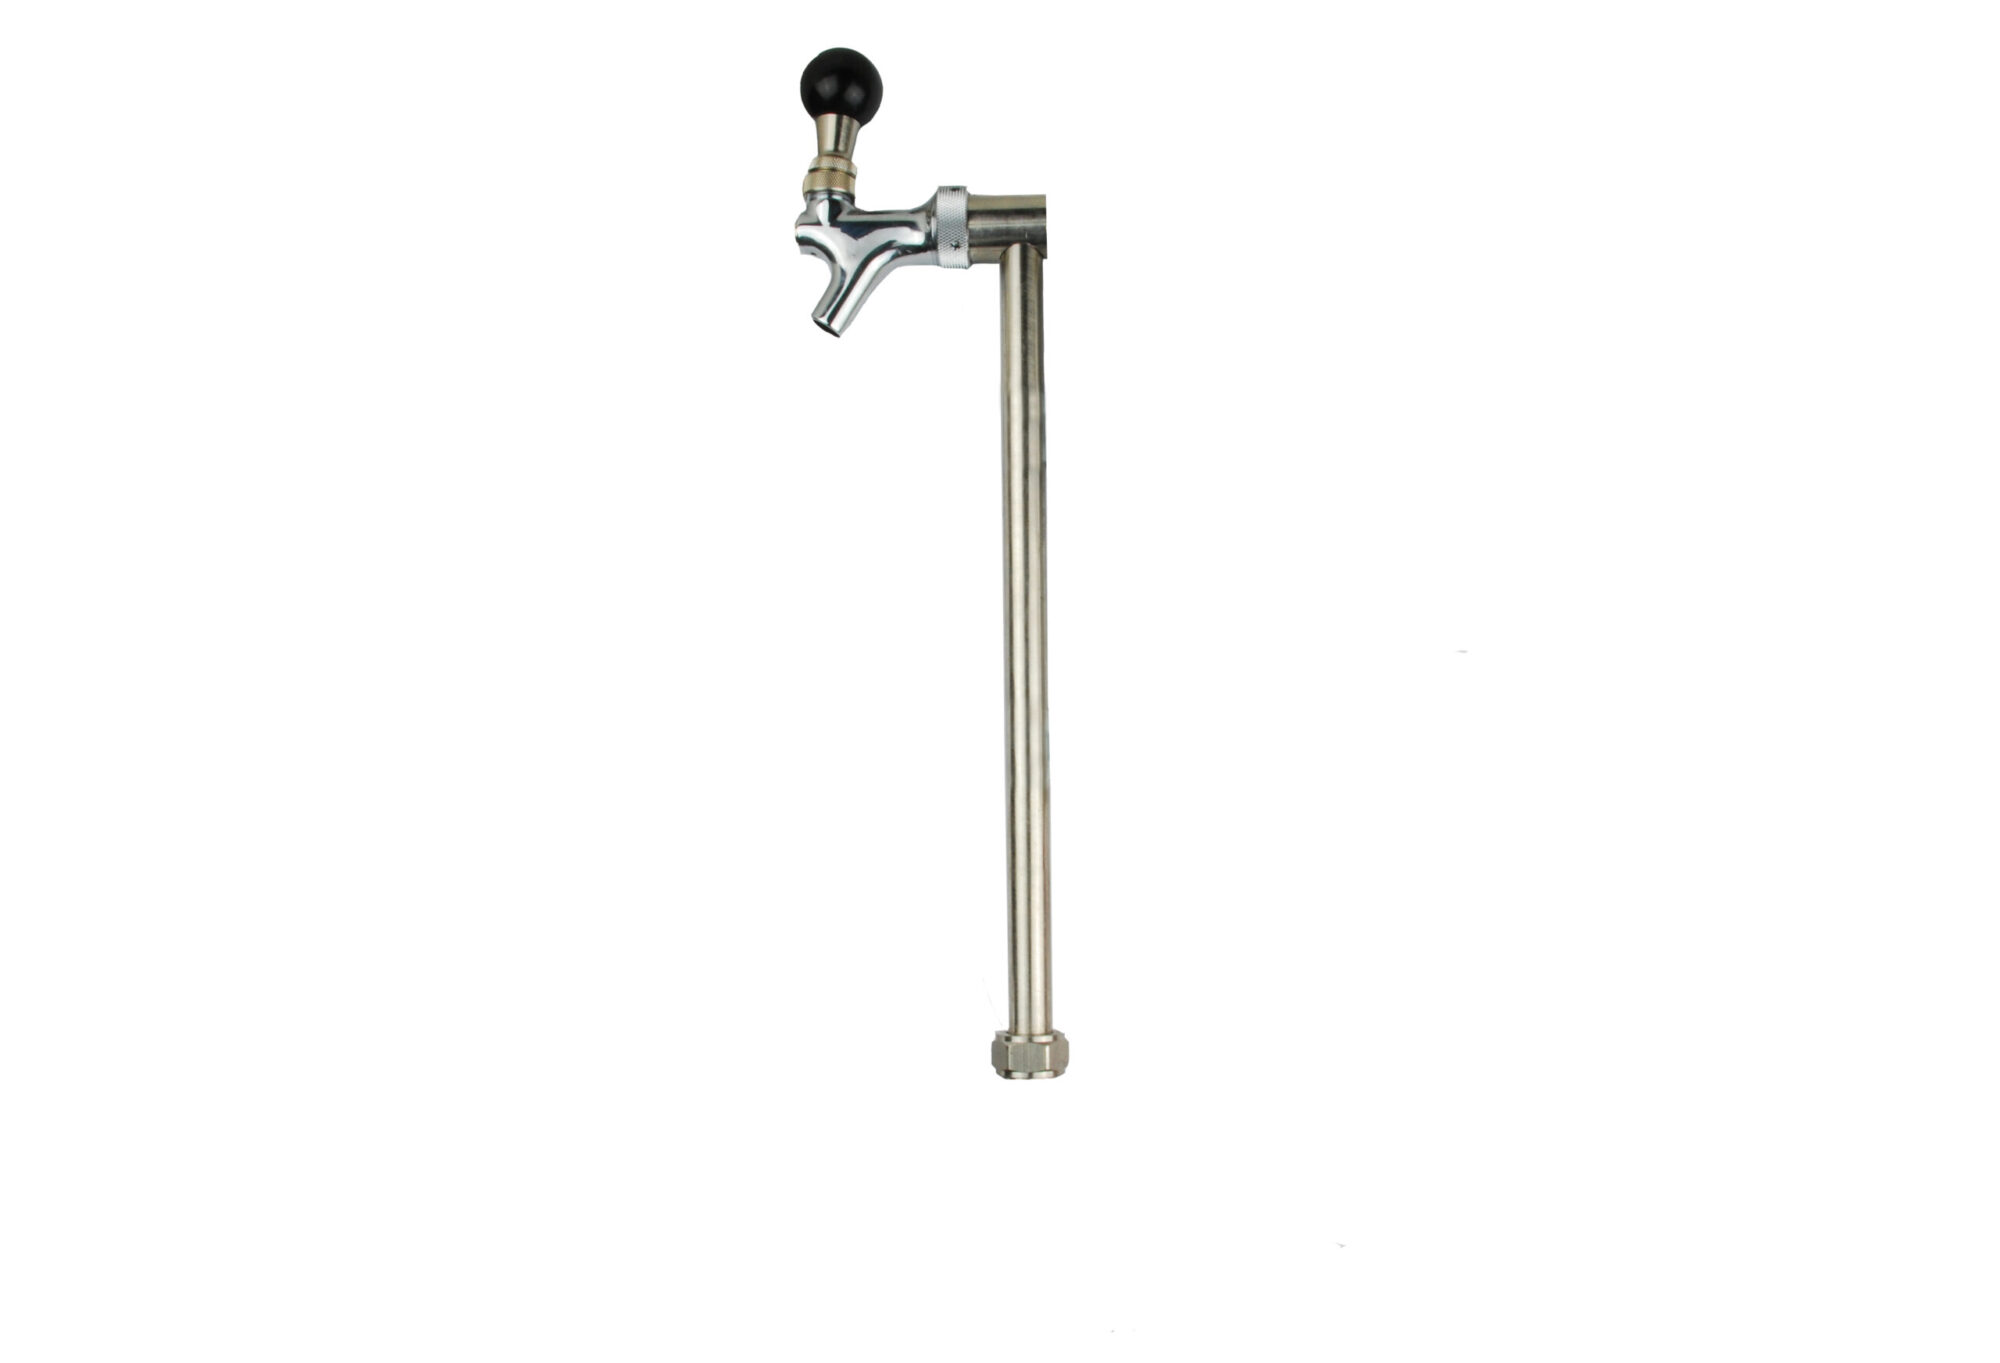 751 Picnic Pump Restricted Rod with #660B Faucet - No Knob